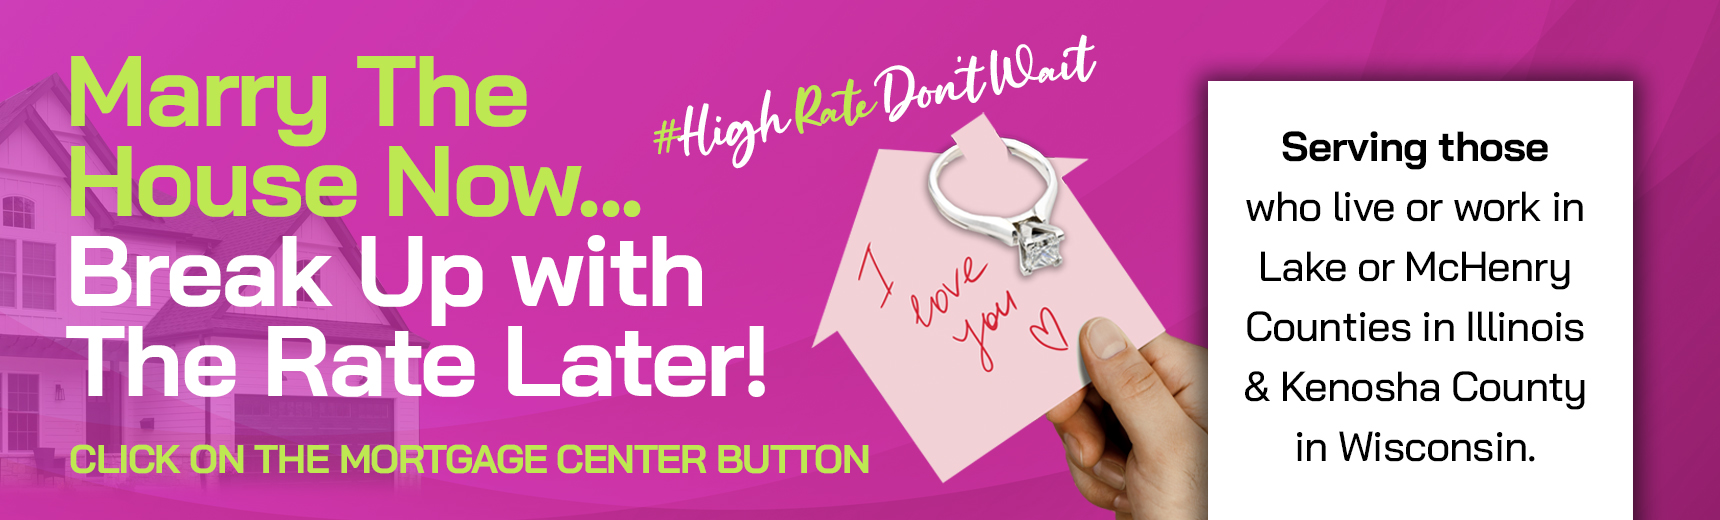 Marry the house now... break up with the rate later! click on the mortgage center button #highratedon&#39;twait Serving those who live or work in Lake or McHenry counties in Illinois &amp; Kenosha county in wisconsin